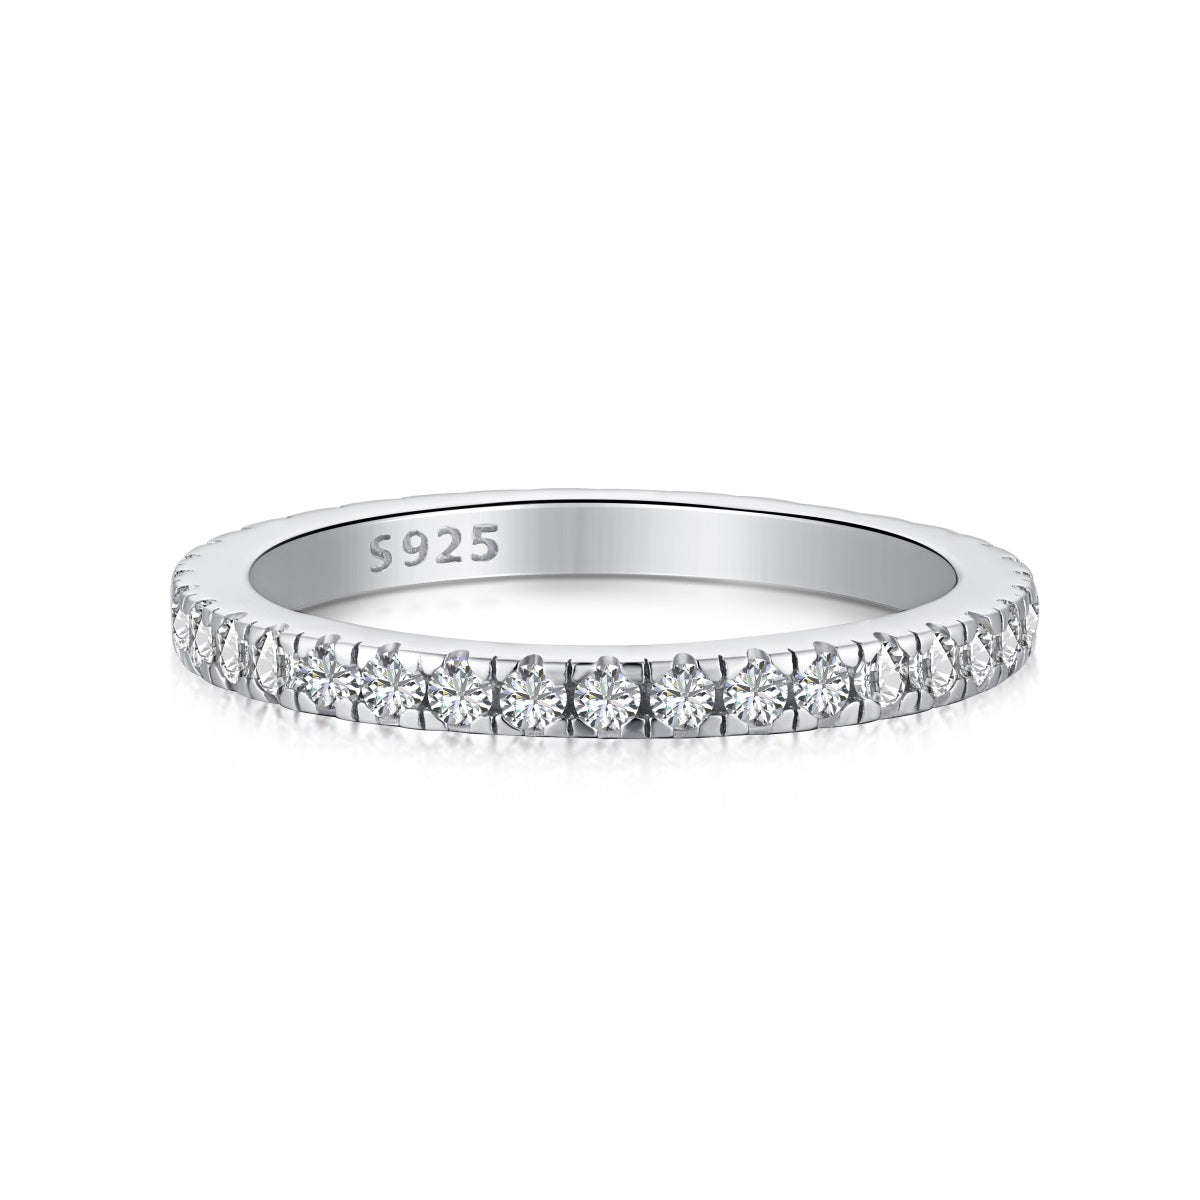 Bella 5A CZ Sterling Silver Band Ring